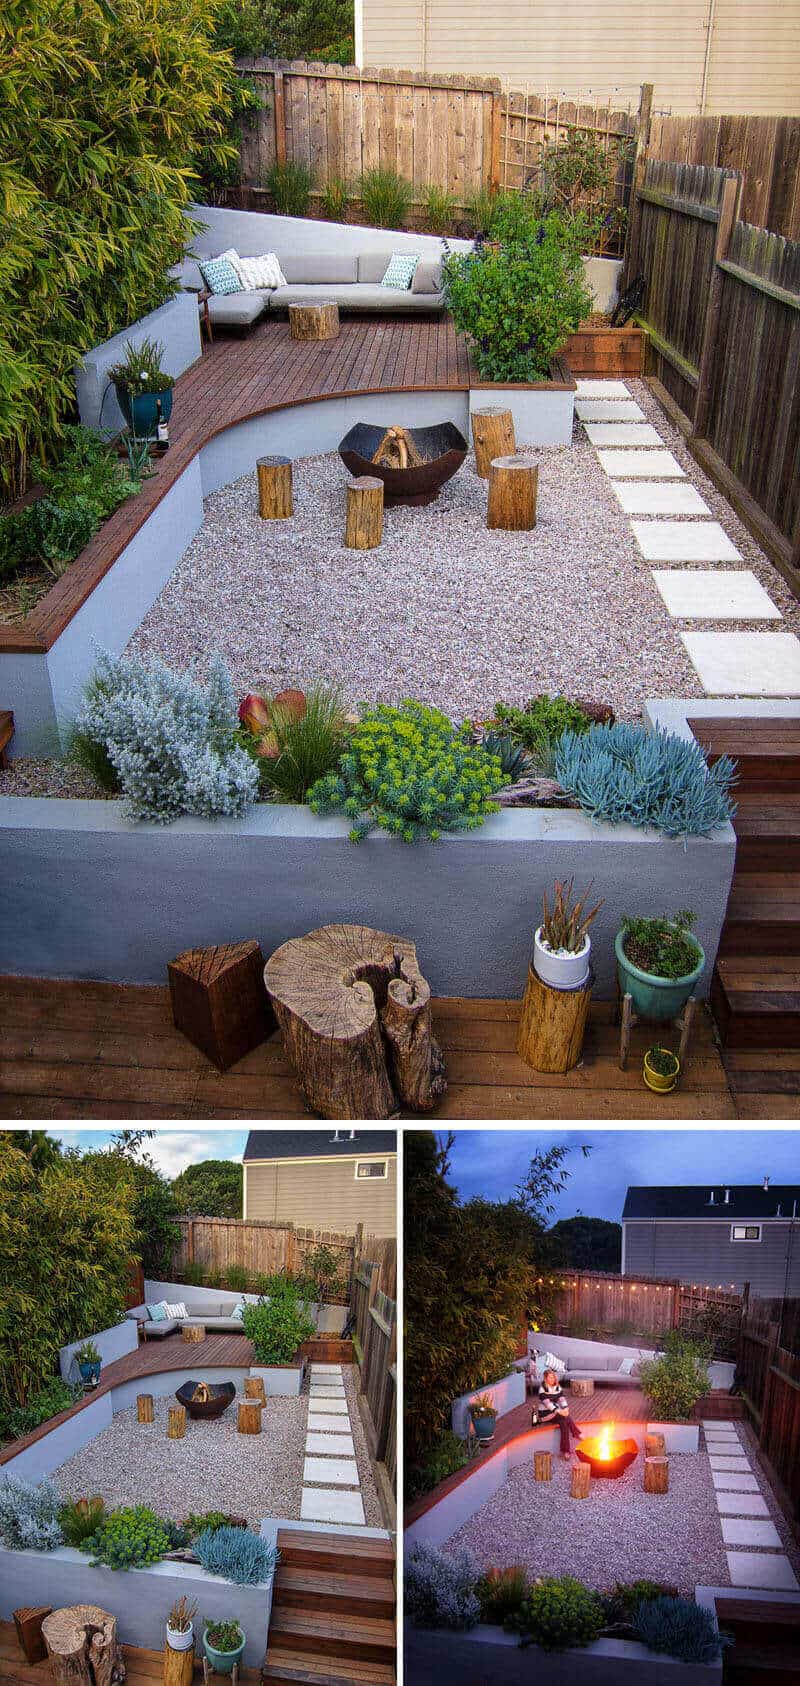 Go ahead and browse through our gallery, get inspired, pin and save the deck patio designs for small yards you like best! Go to betterthathome.com for more.